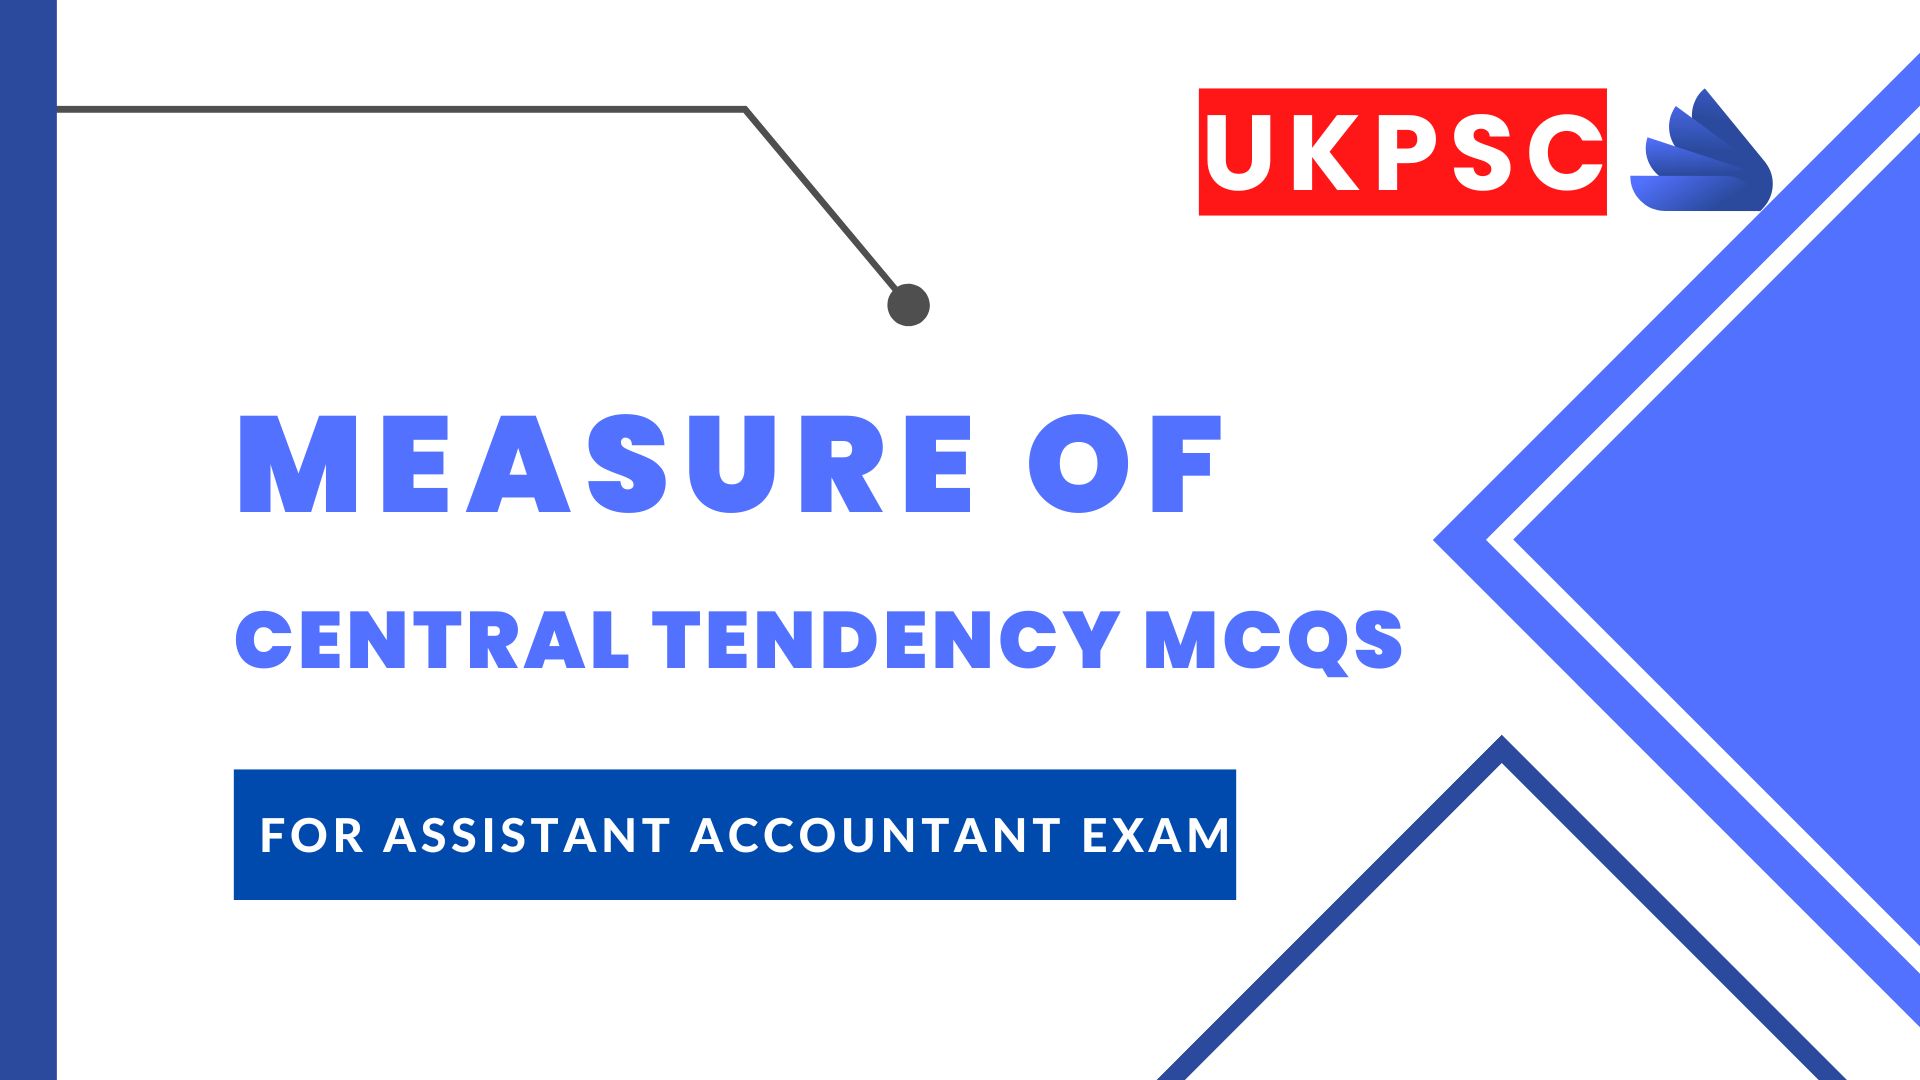 MEASURE OF CENTRAL TENDENCY MCQS